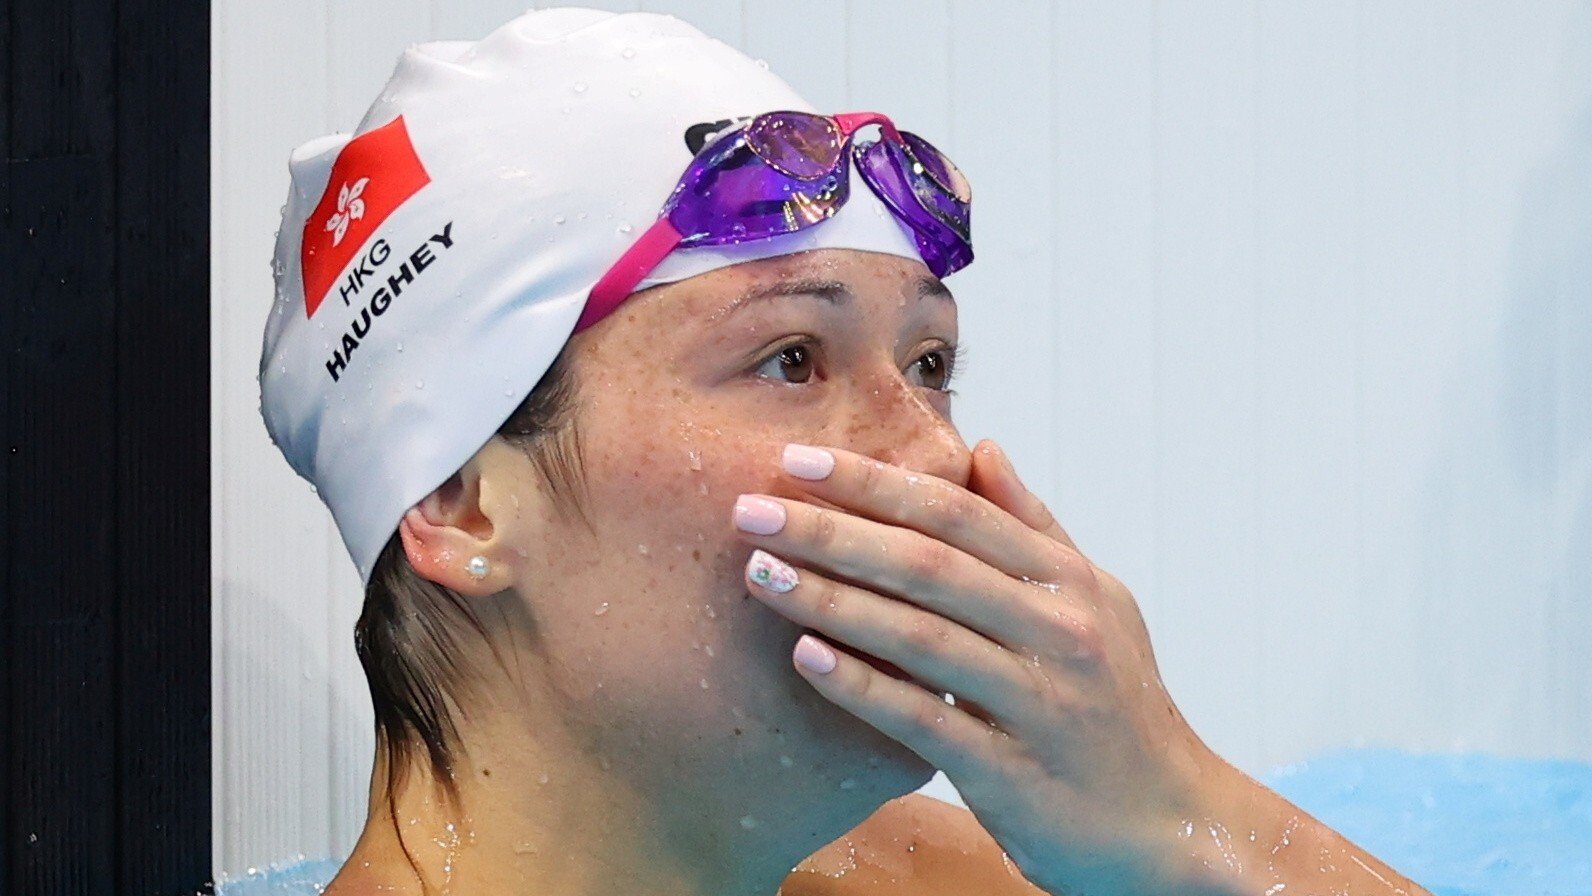 Siobhan Haughey sees her name in the silver medal spot after the 100m freestyle at the Tokyo Olympics. Photo: Reuters